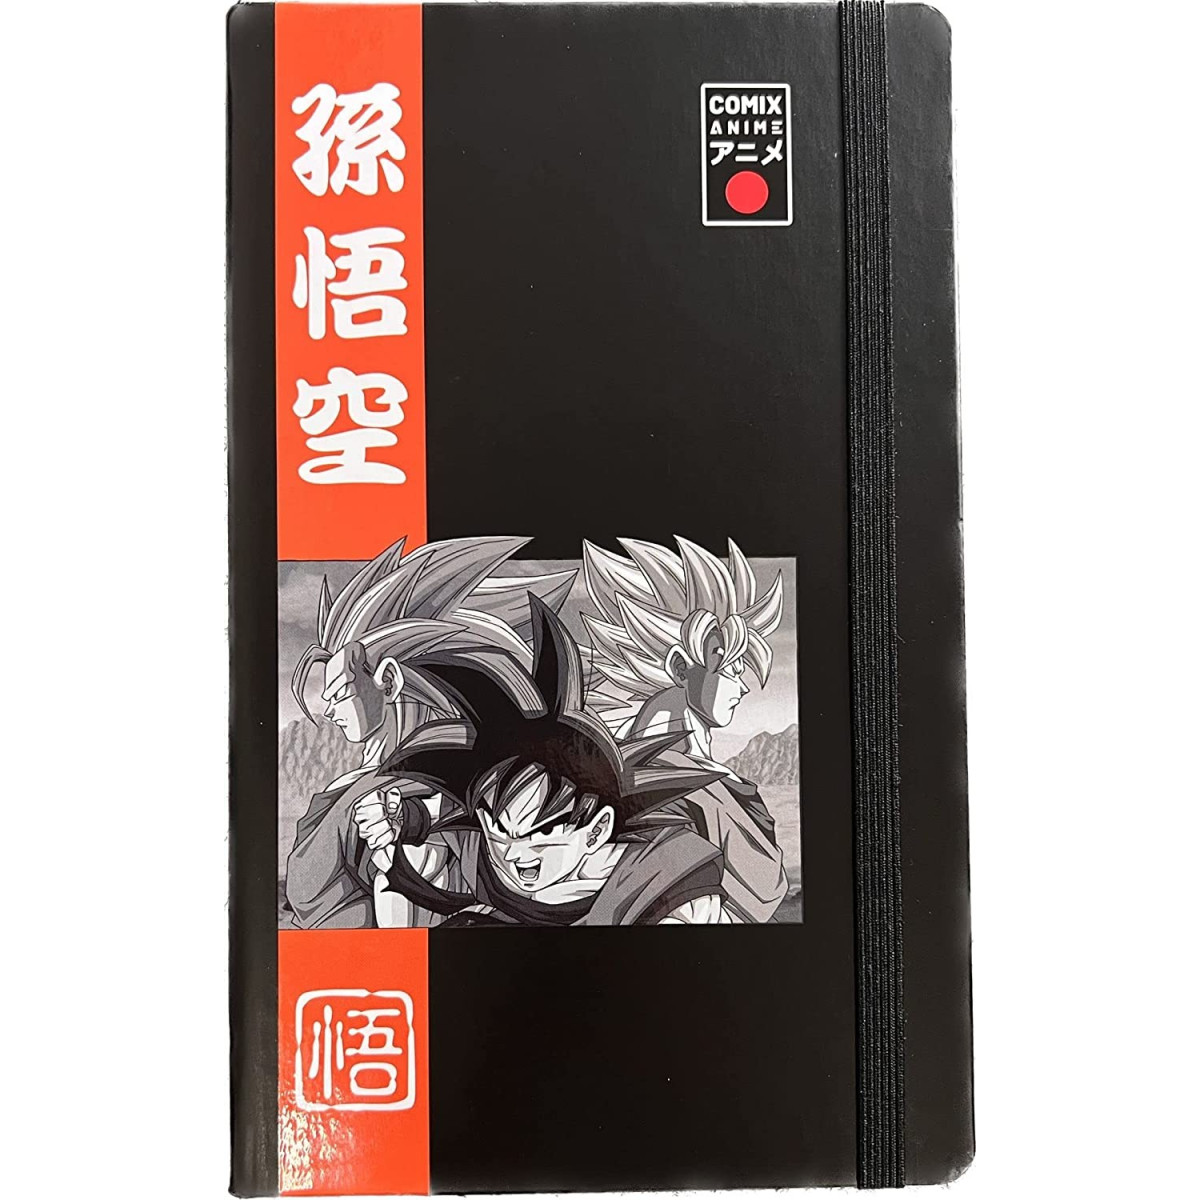 Pocketnote Anime Haikyuu Full Character Softcover A6 Notebook Note Agenda  Planner  Shopee Philippines